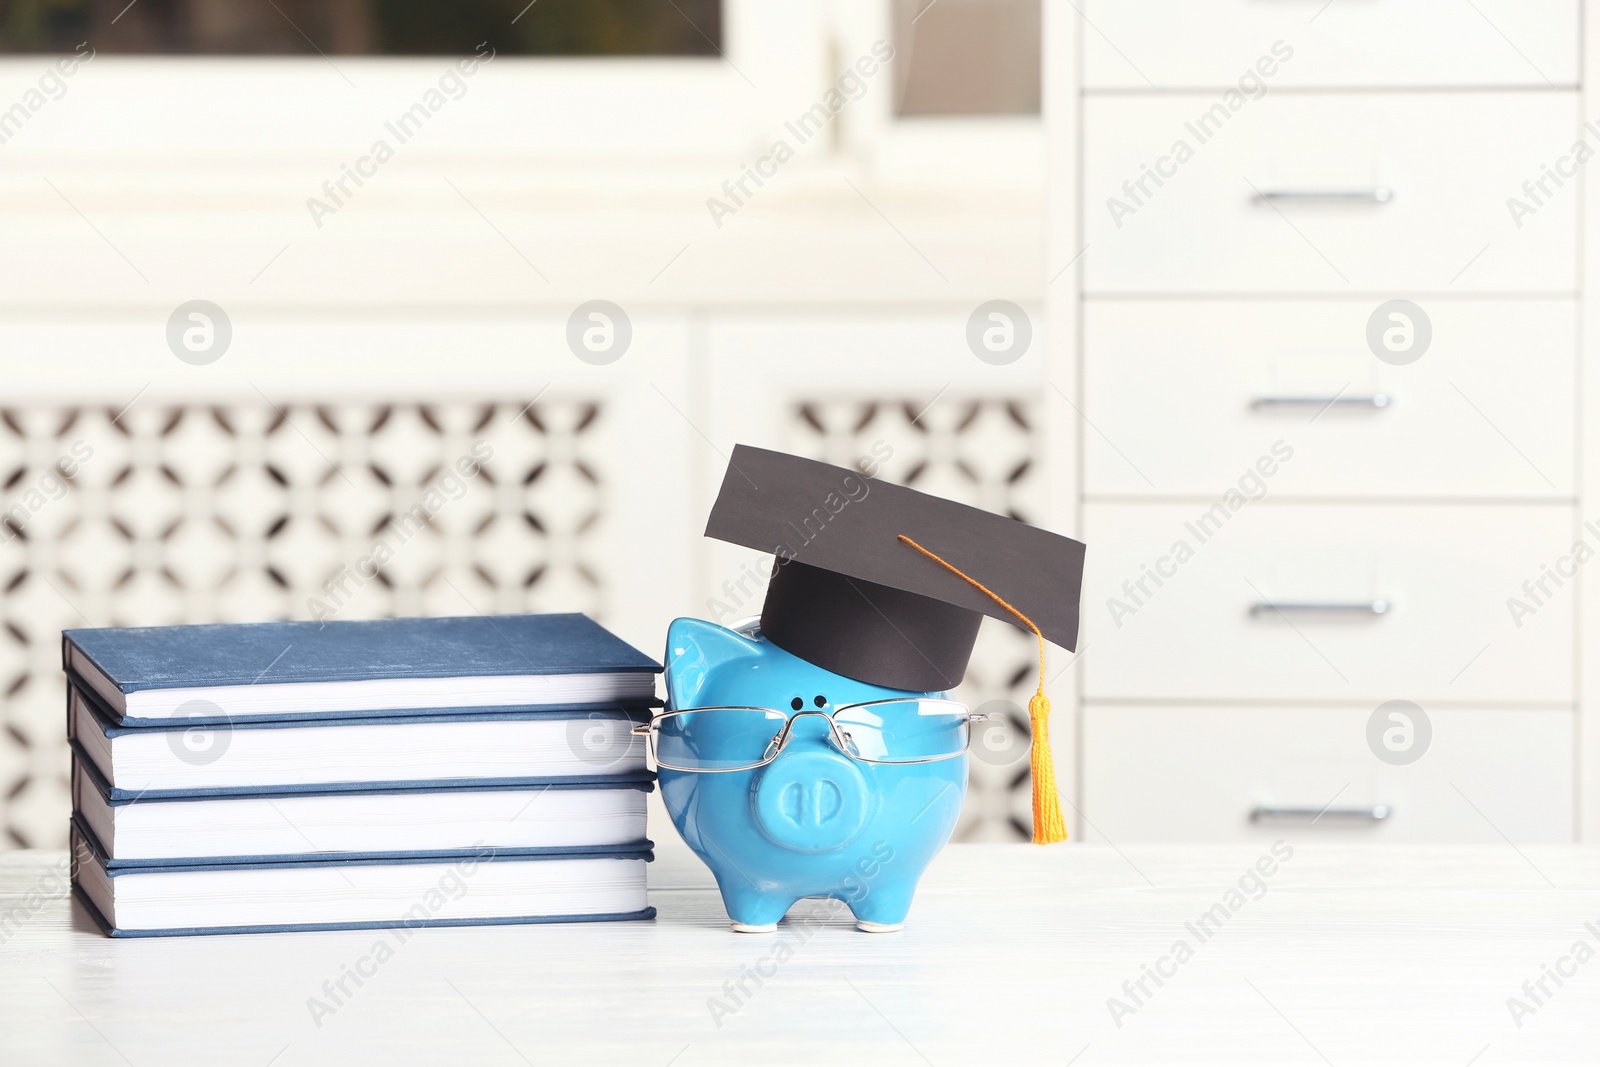 Photo of Piggy bank with graduation hat and books on table against blurred background